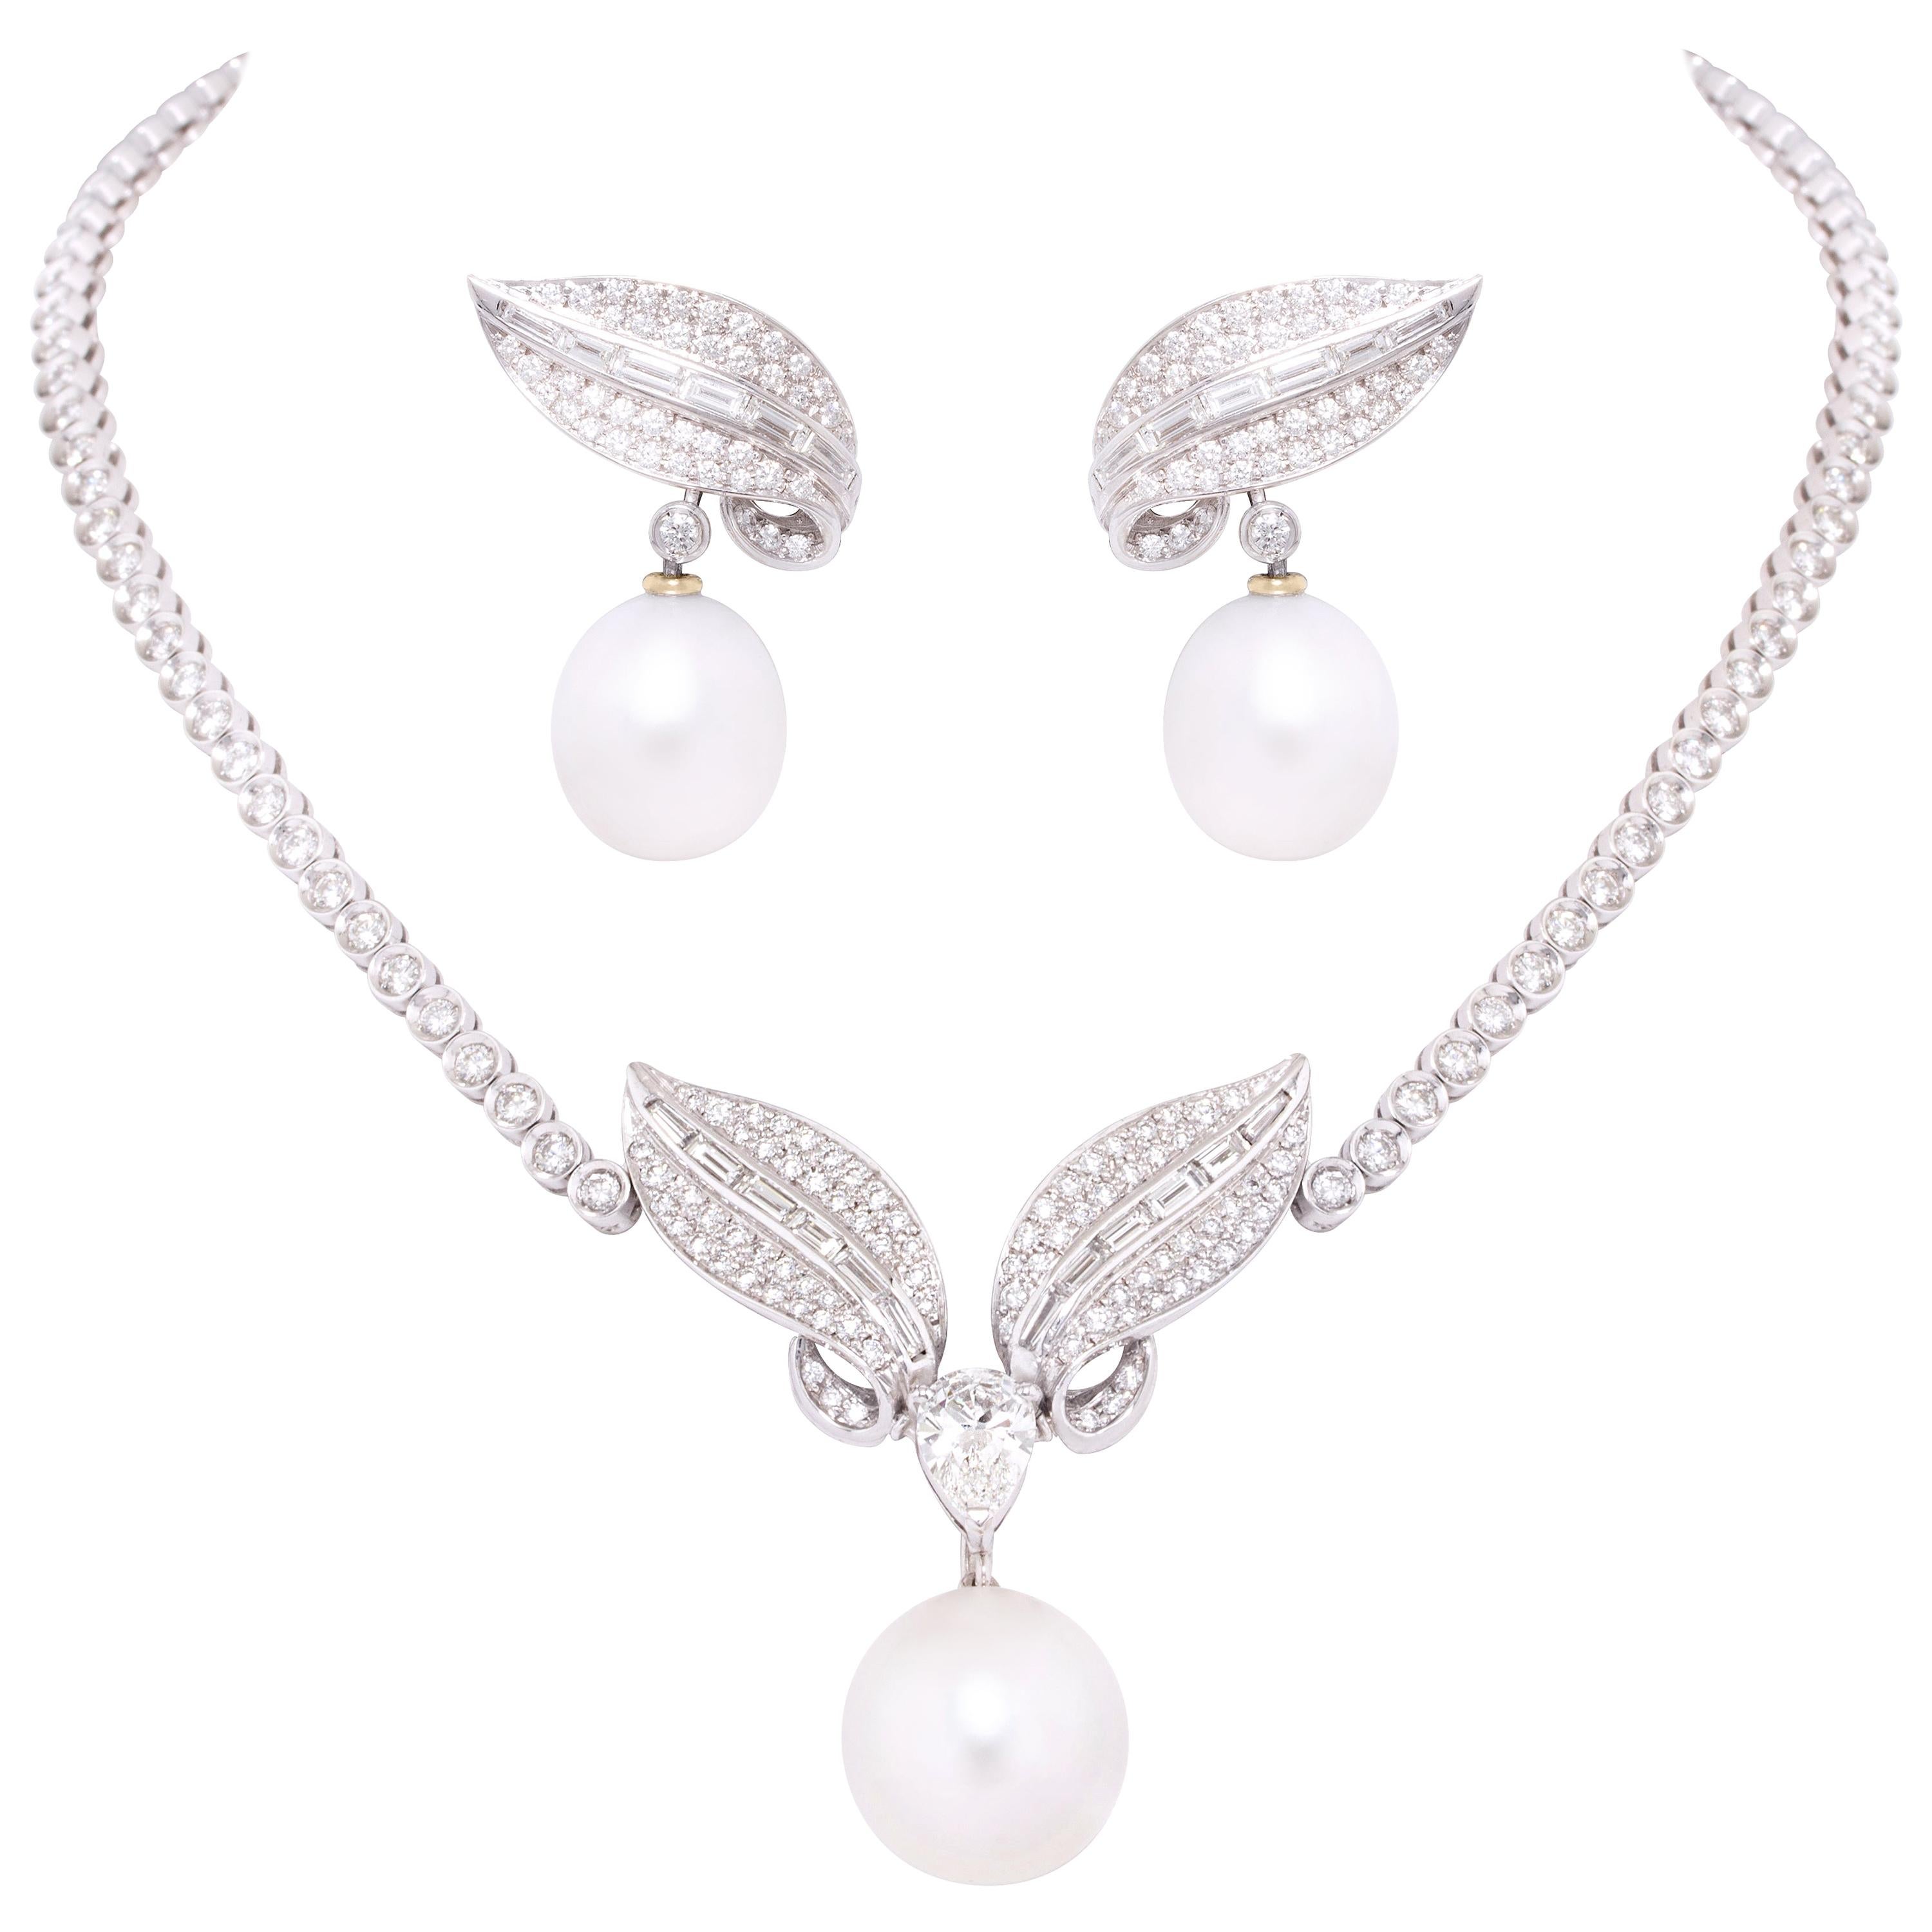 Ella Gafter Diamond South Sea Pearl Necklace Earrings Set For Sale